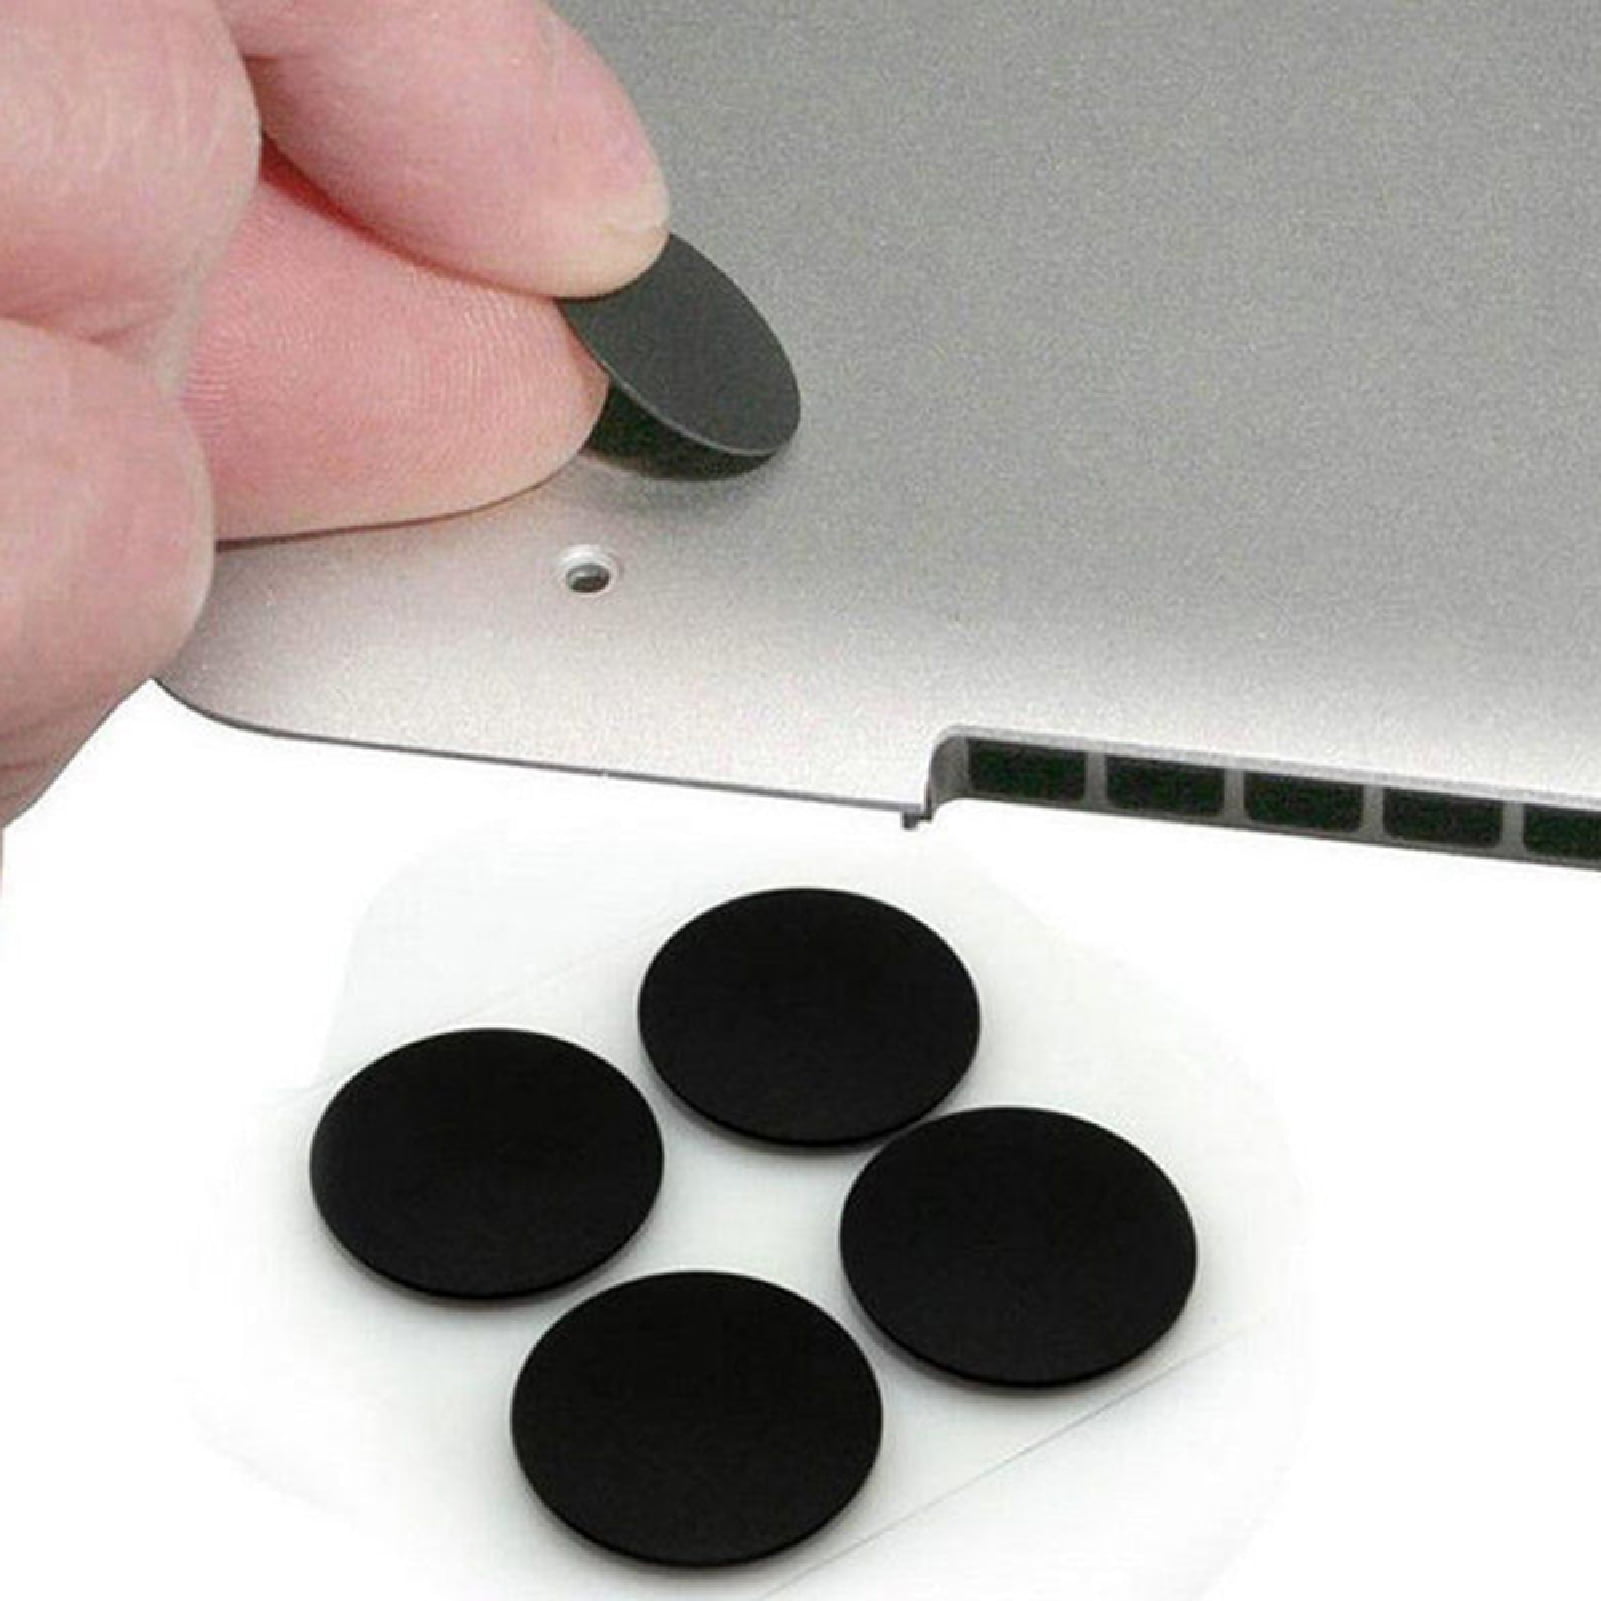 50PCS Rubber Seat Foot Feet for MacBook Pro A1278 A1286 A1297 Bottom Case Cover 